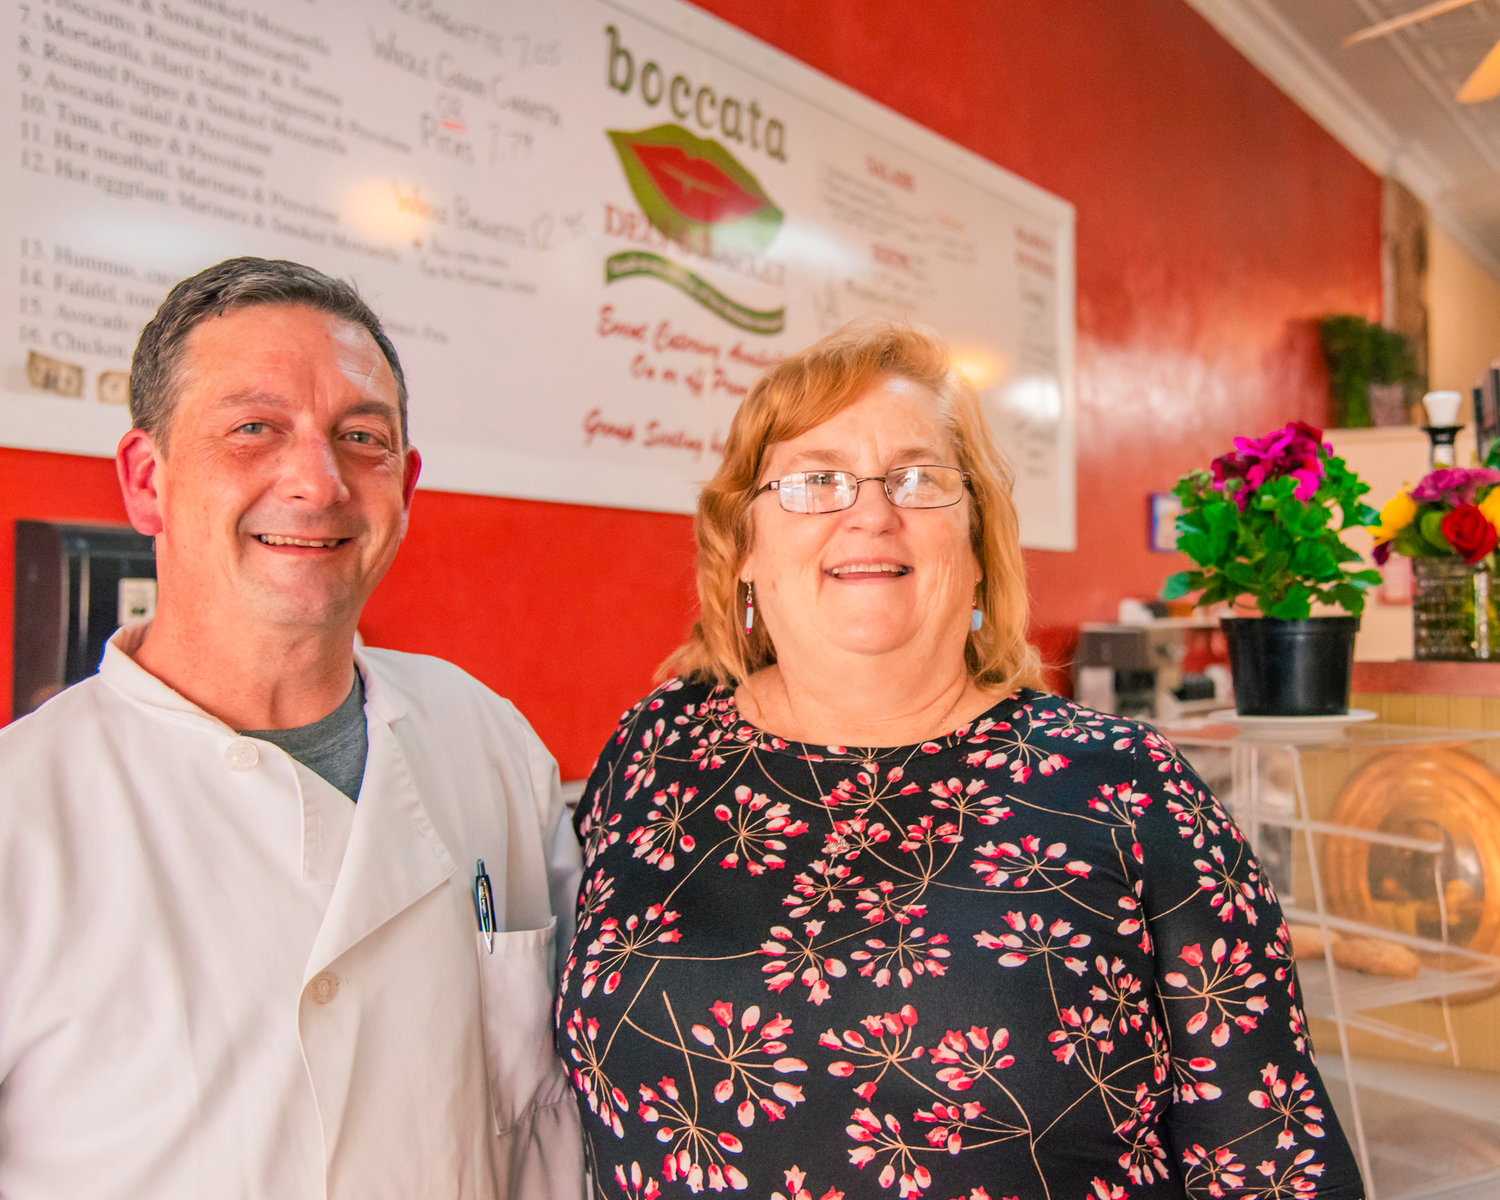 Darin and Kim Harris smile and pose for a photo inside the Boccata Restaurant in Centralia on Friday.